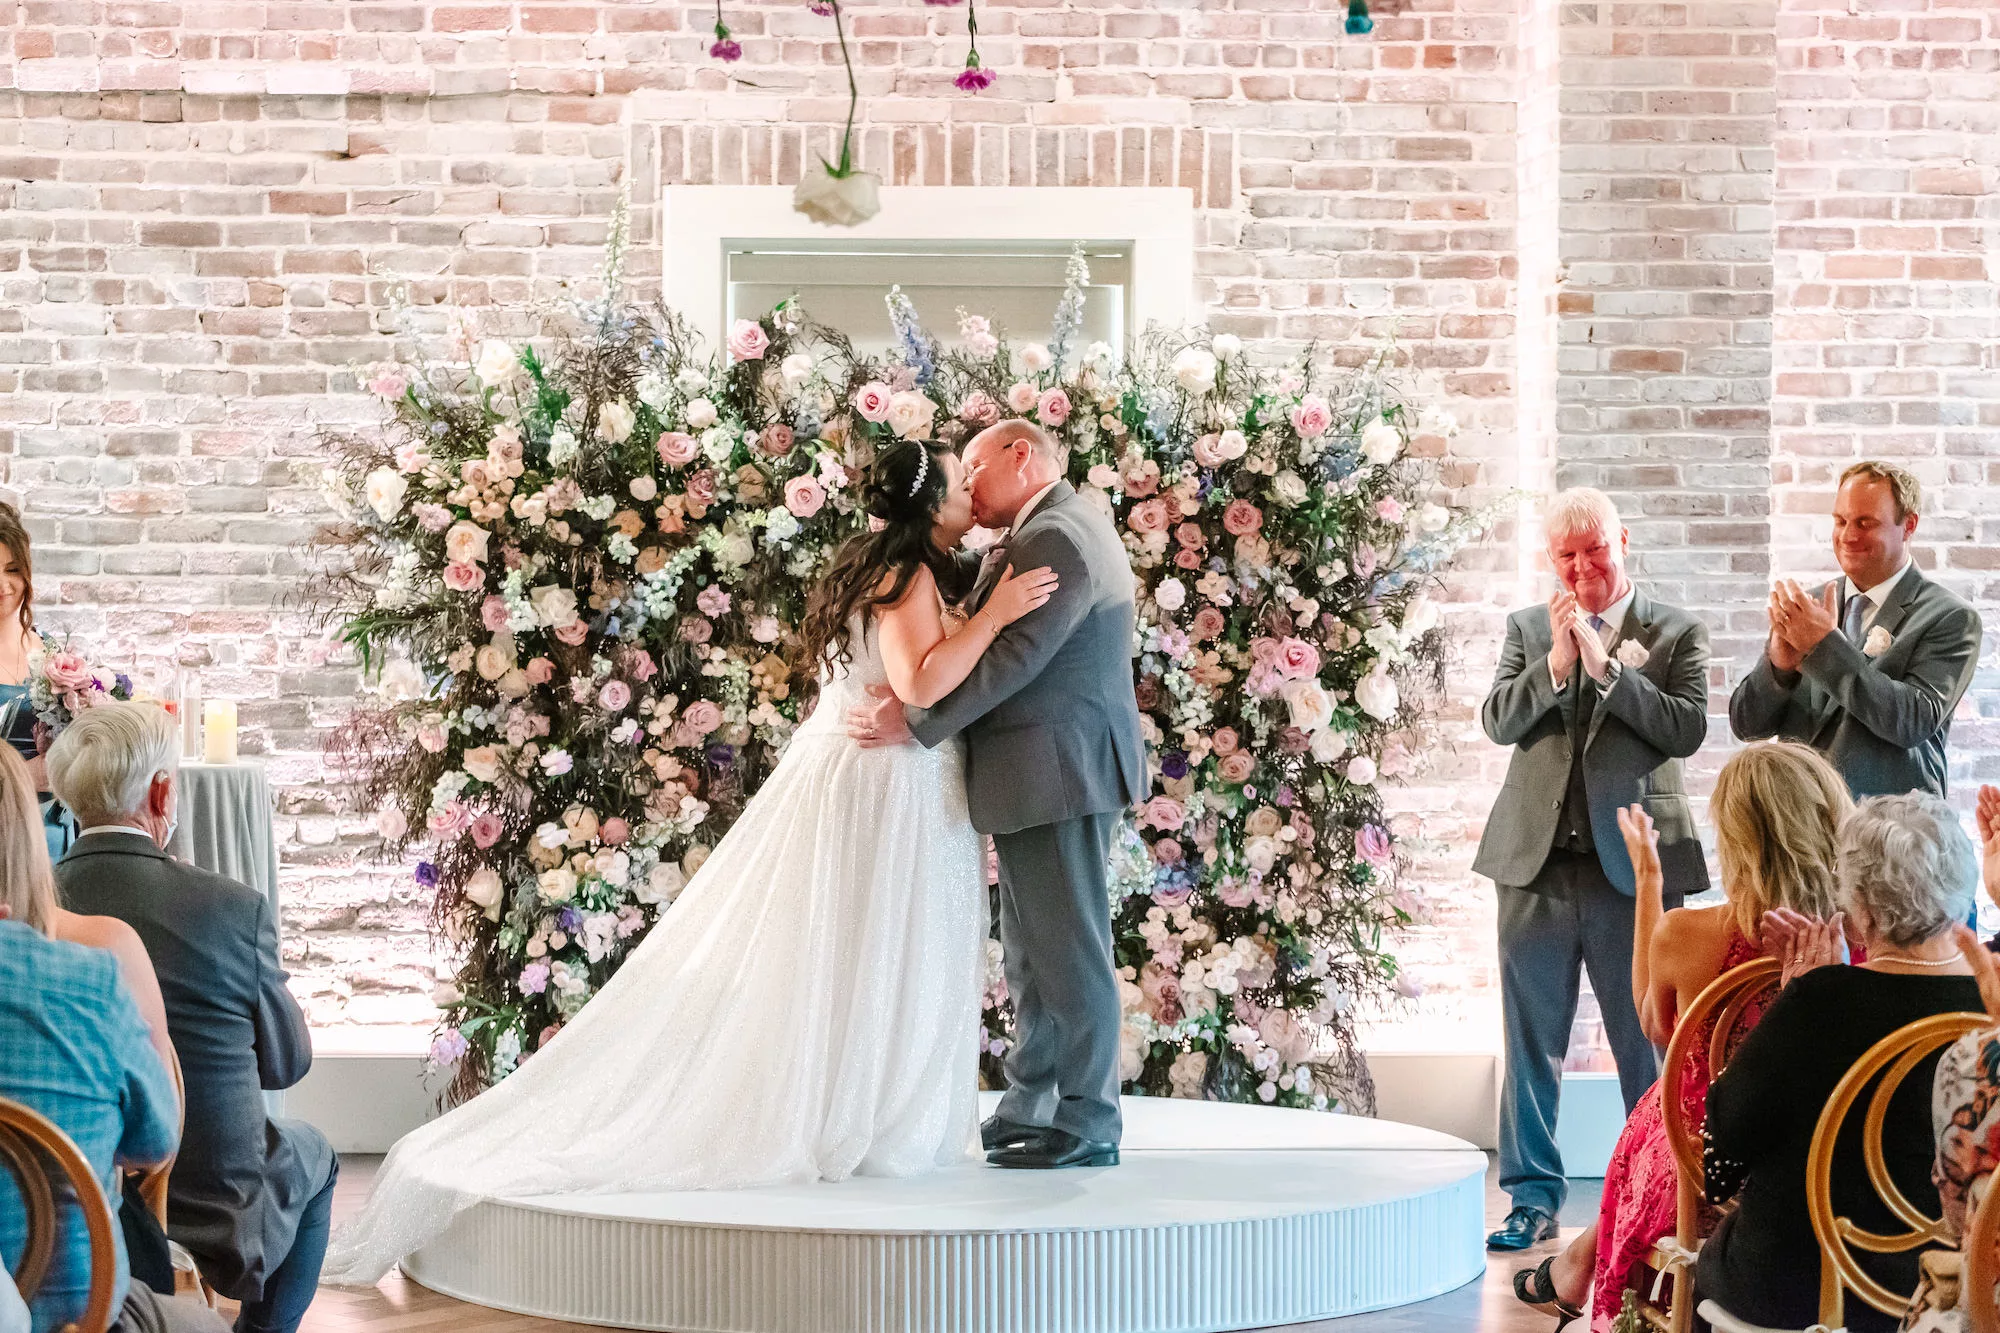 Bride and Groom First Kiss Wedding Portrait | Whimcial Pink Roses, White Hydrangeas, Blue Stock Flowers, and Greenery Backdrop Inspiration | Tampa Bay Event Venue Red Mesa Events